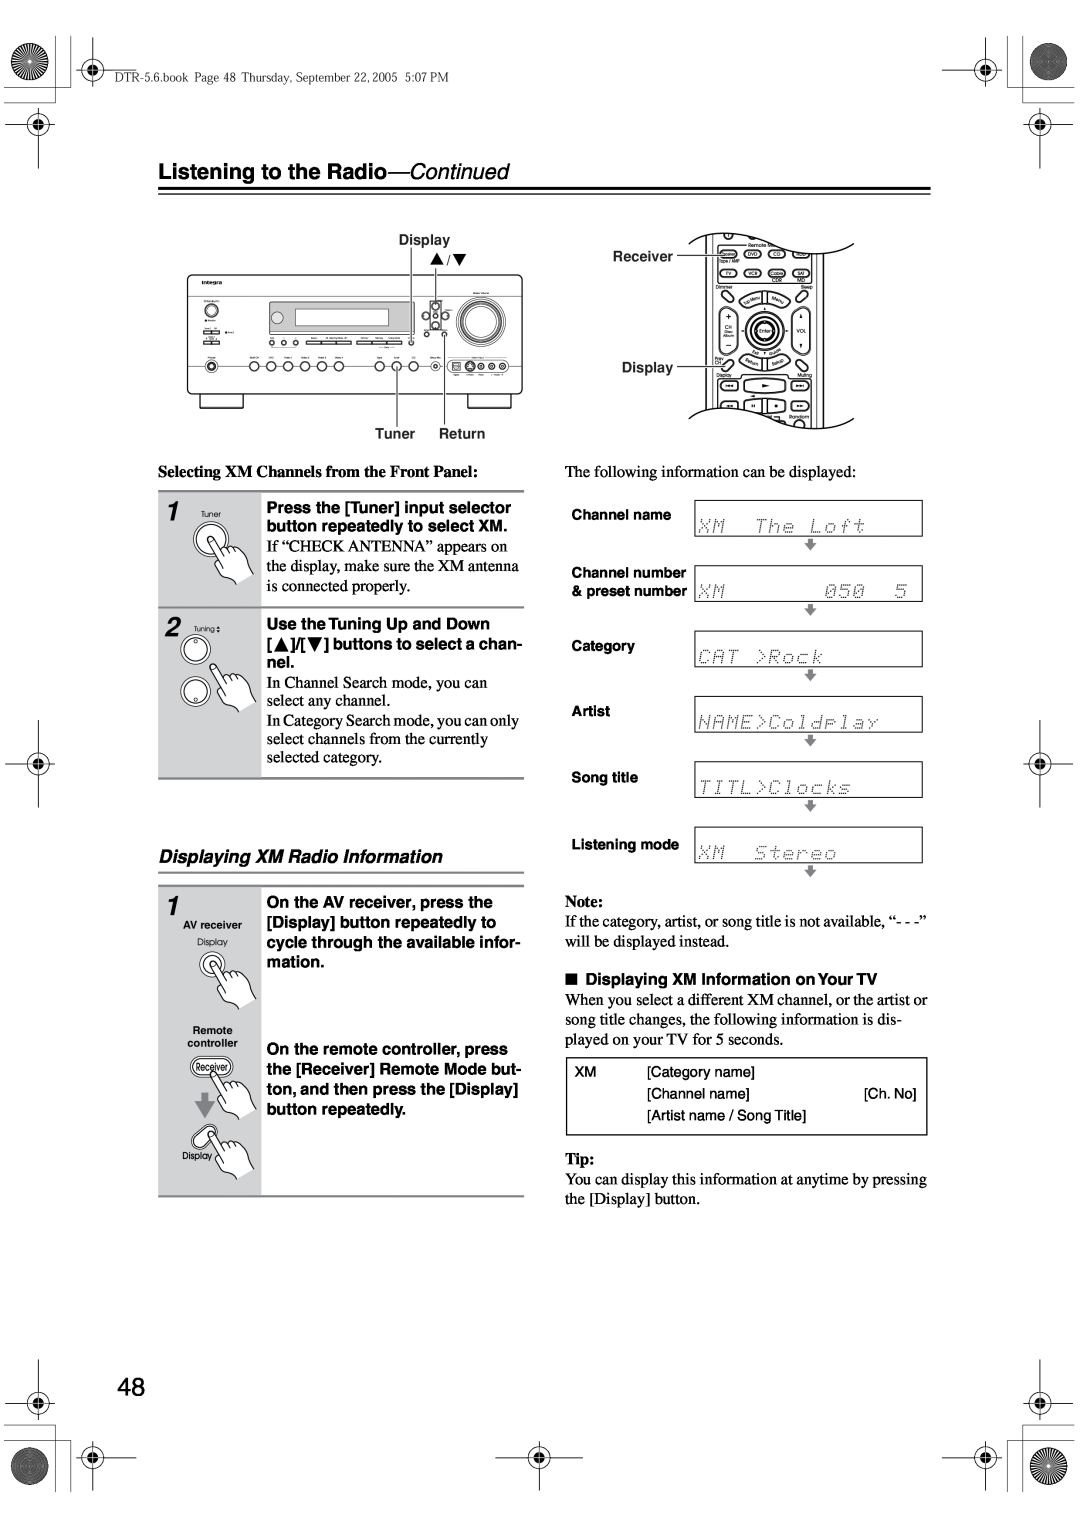 Integra DTR-5.6 instruction manual Displaying XM Radio Information, Selecting XM Channels from the Front Panel 